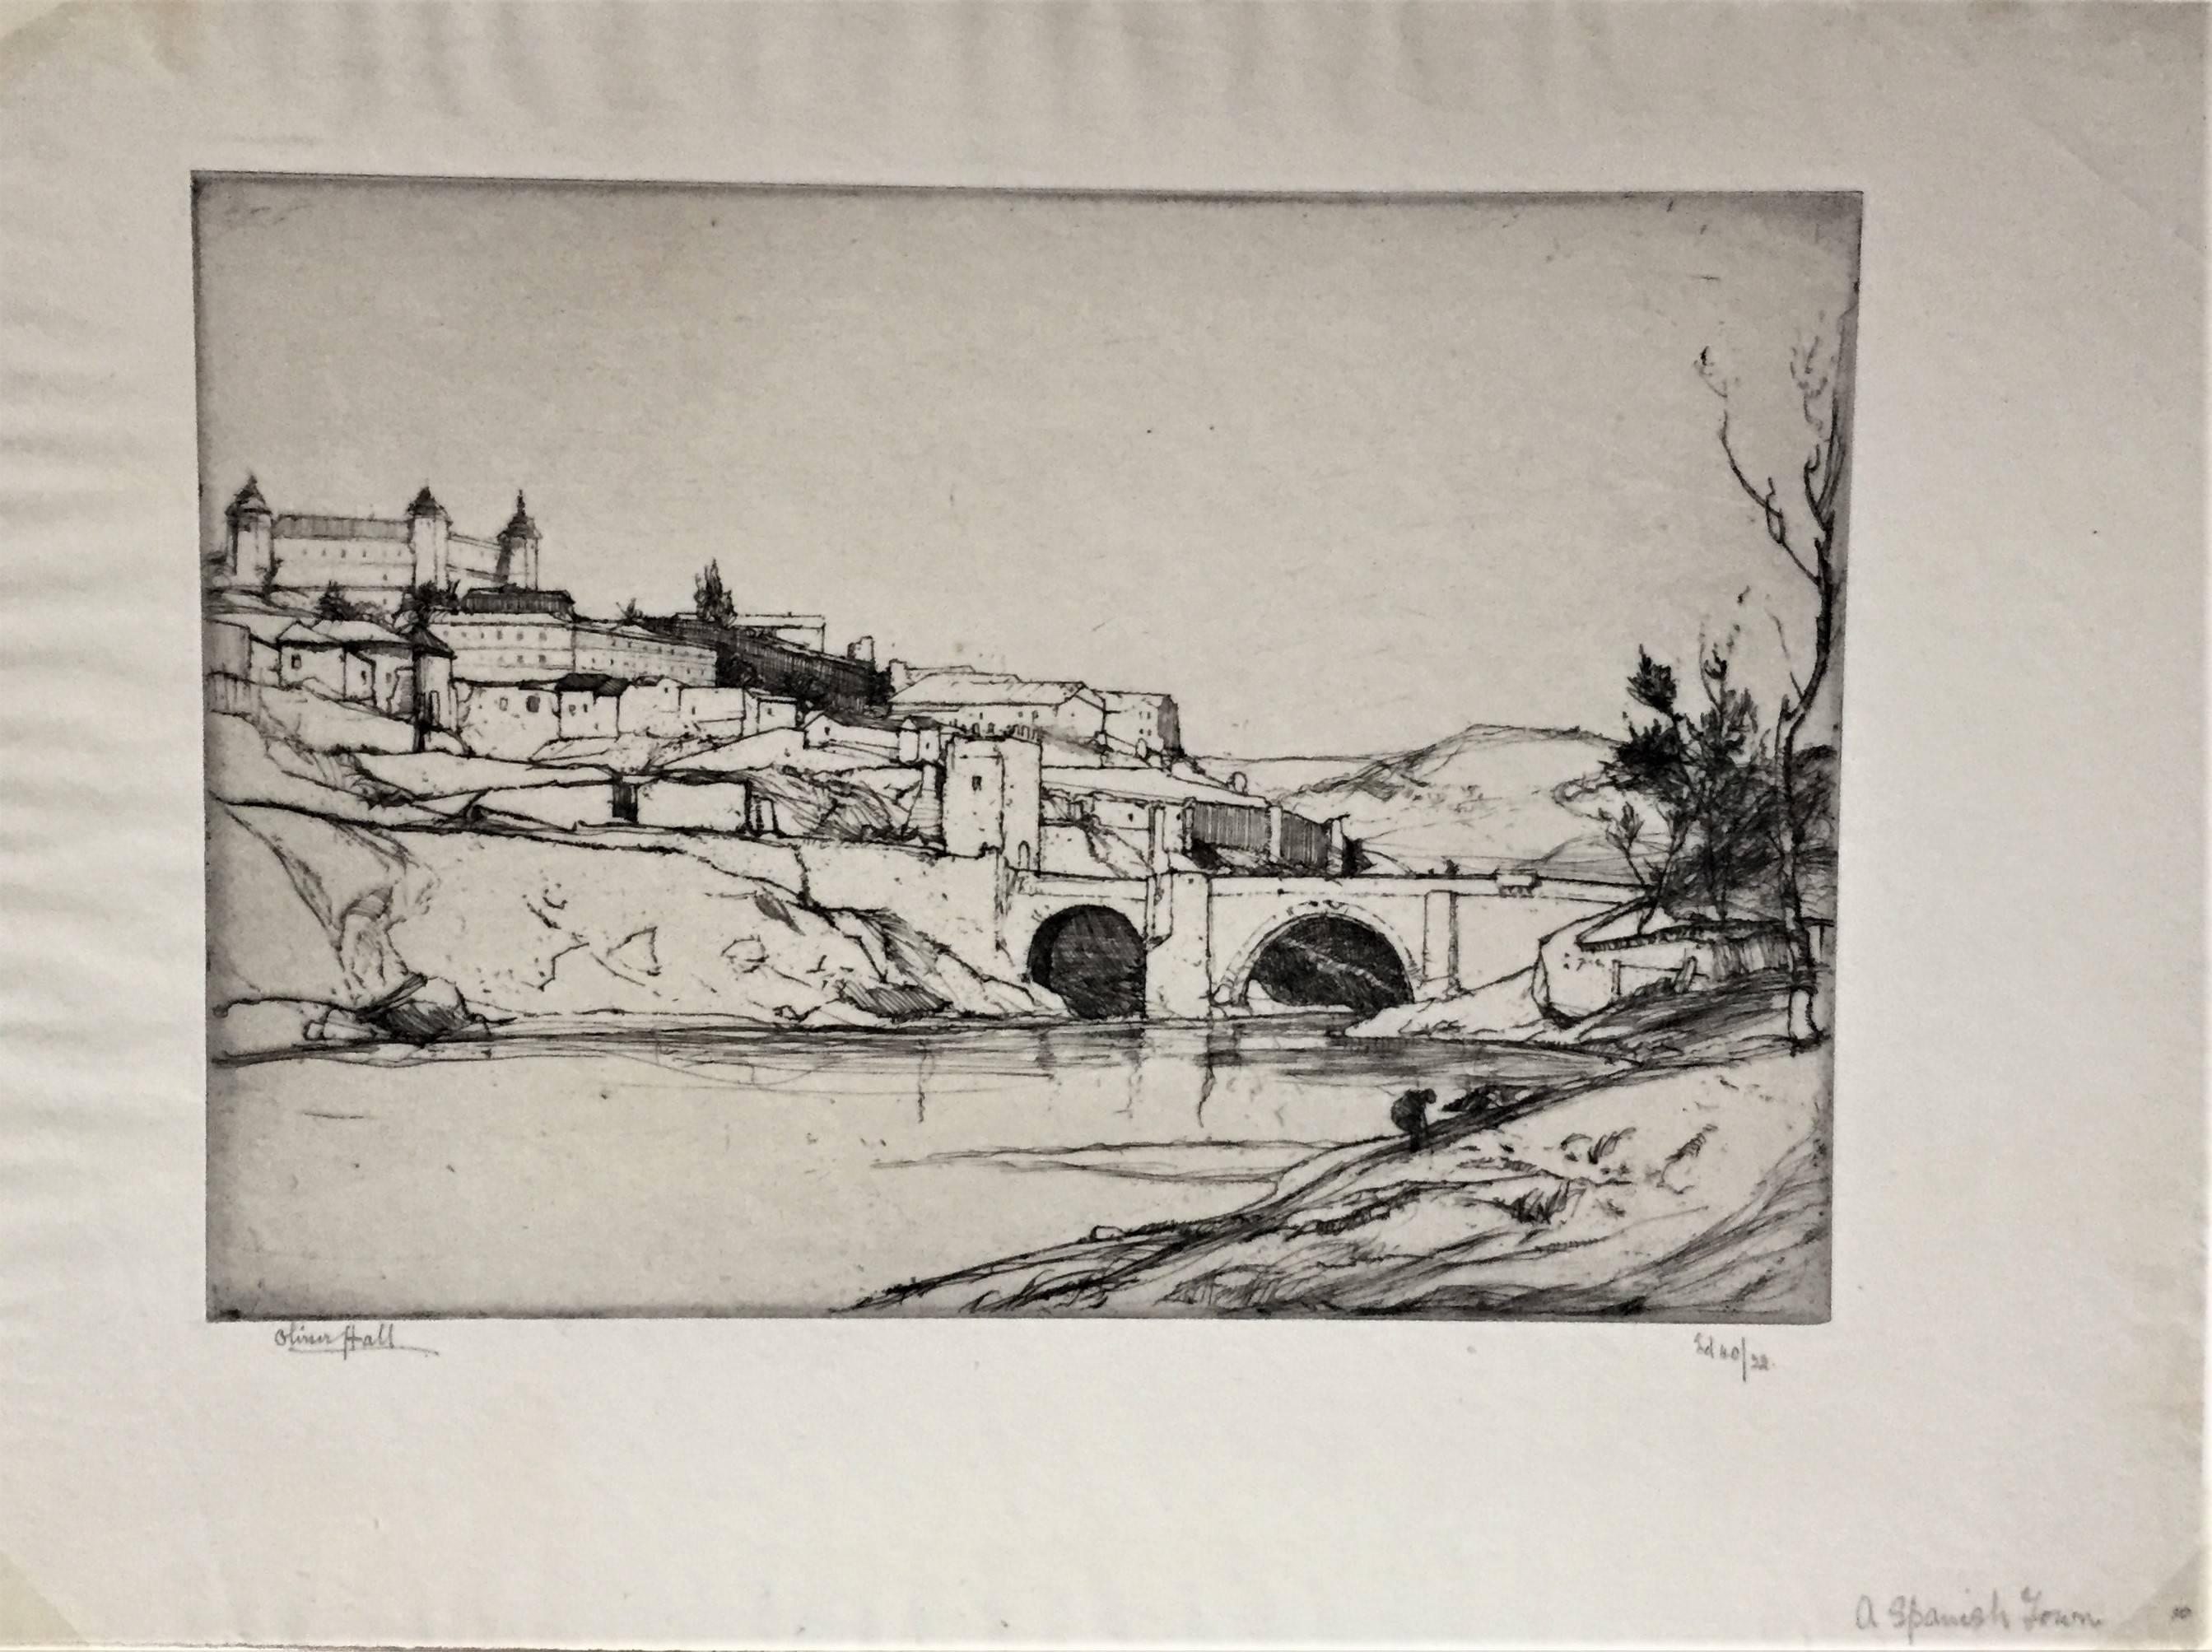 A Spanish Town. - Print by Oliver Hall, R.A., R.E., R.S.W.